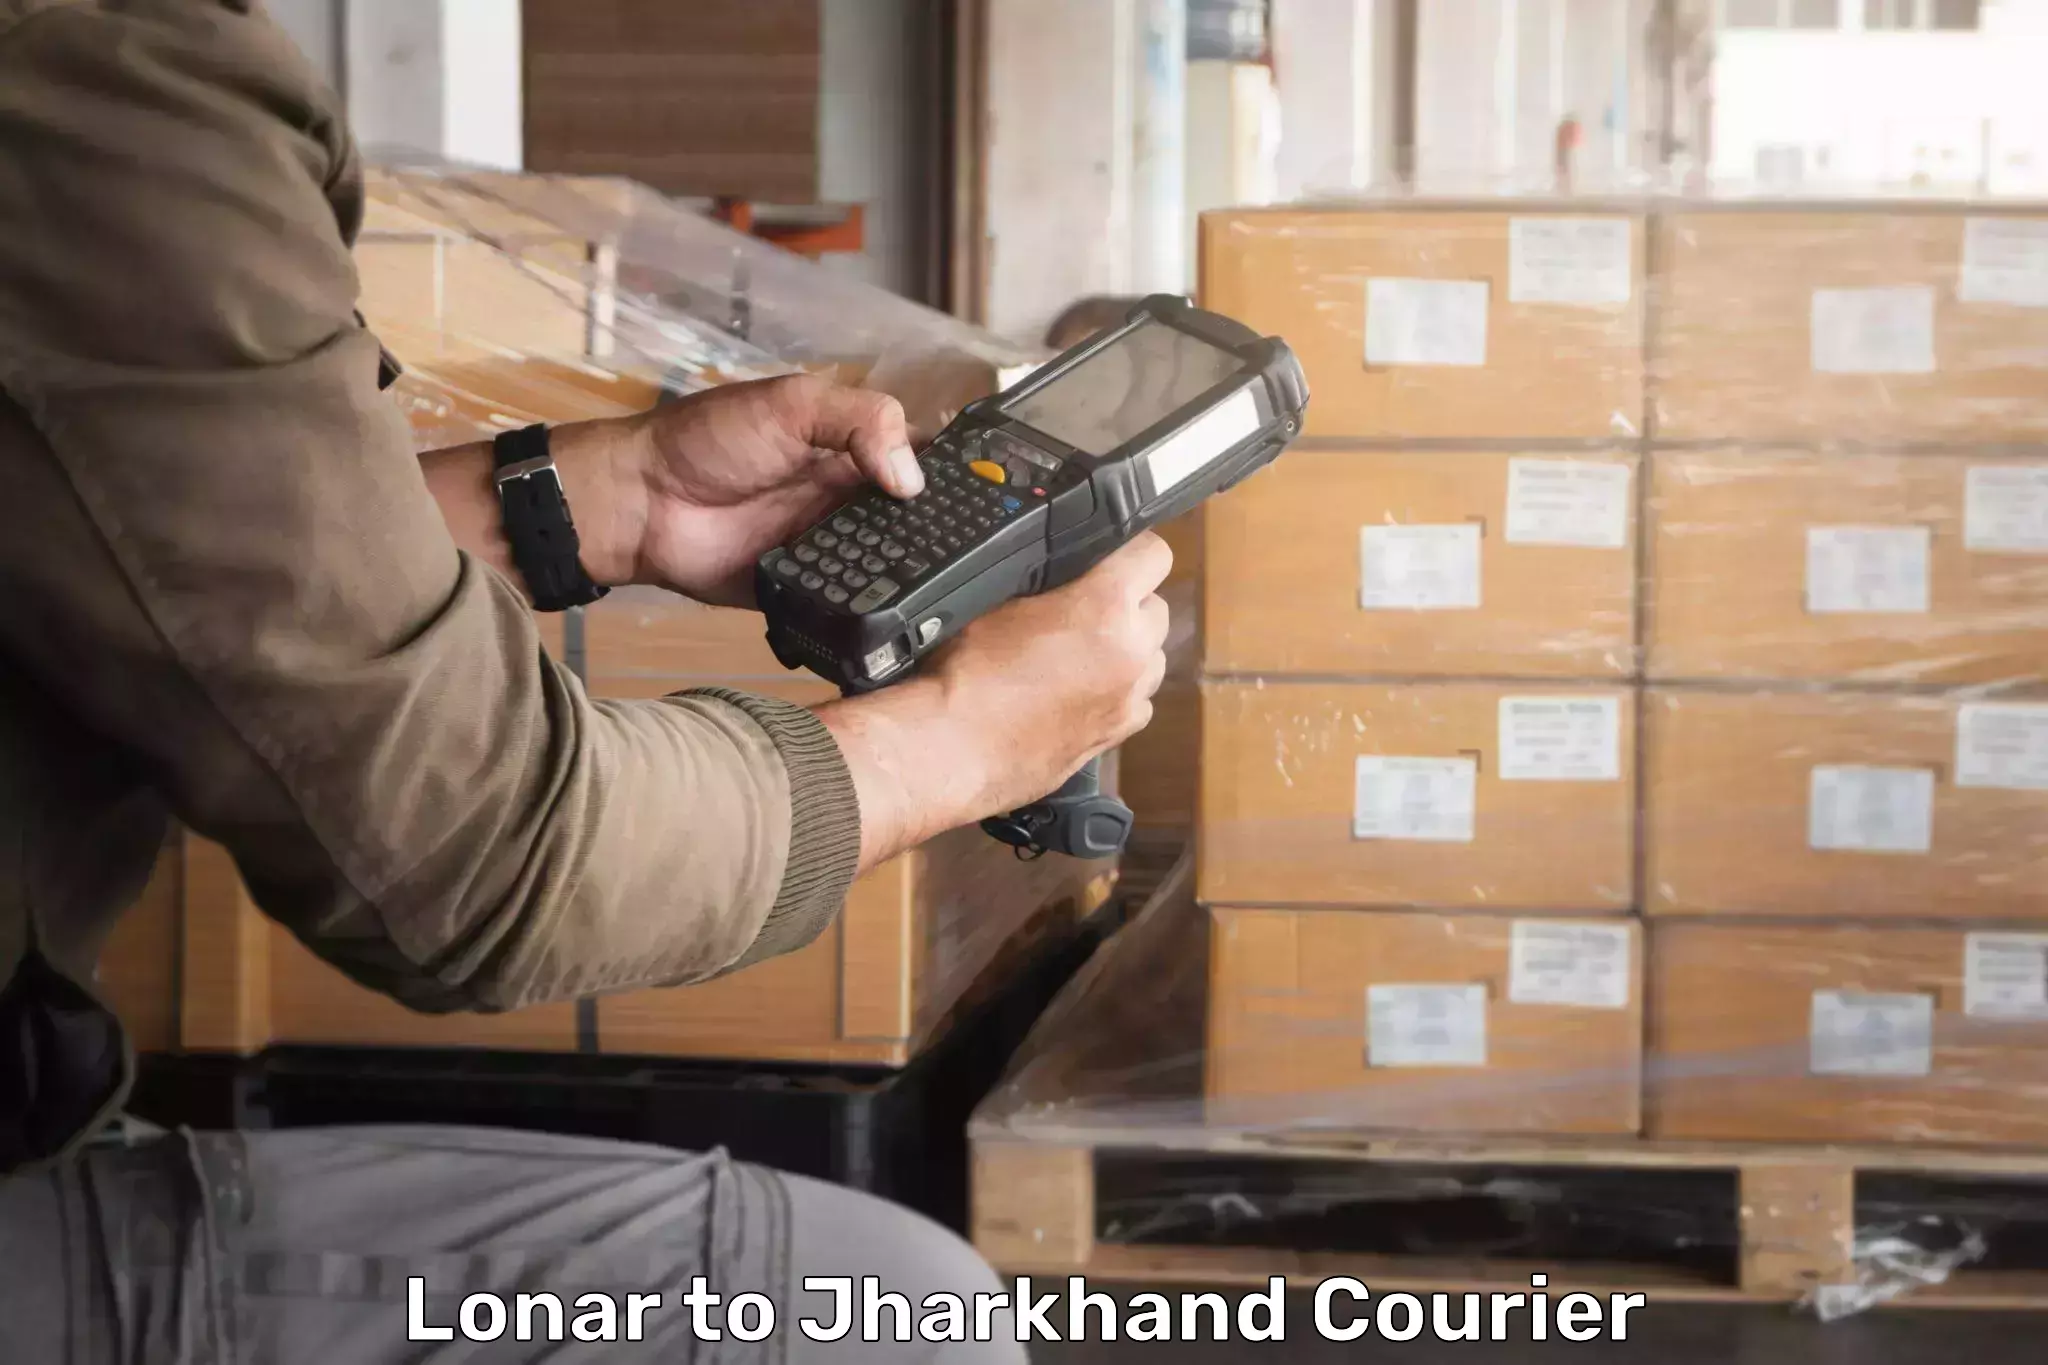 On-call courier service Lonar to Kedla